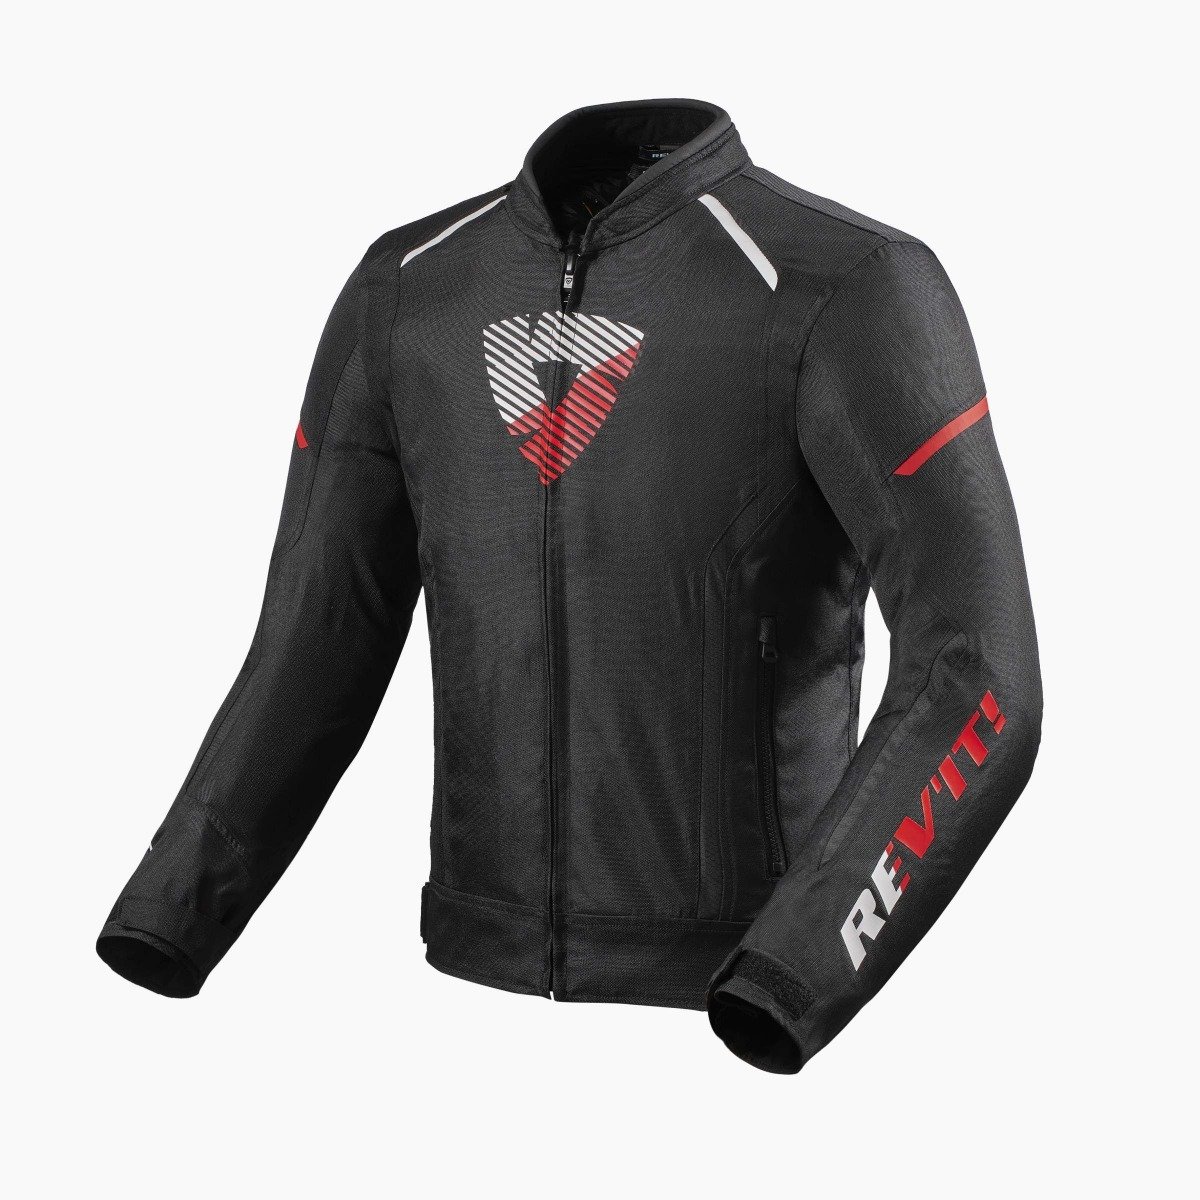 Image of REV'IT! Sprint H2O Jacket Black Neon Red Talla S